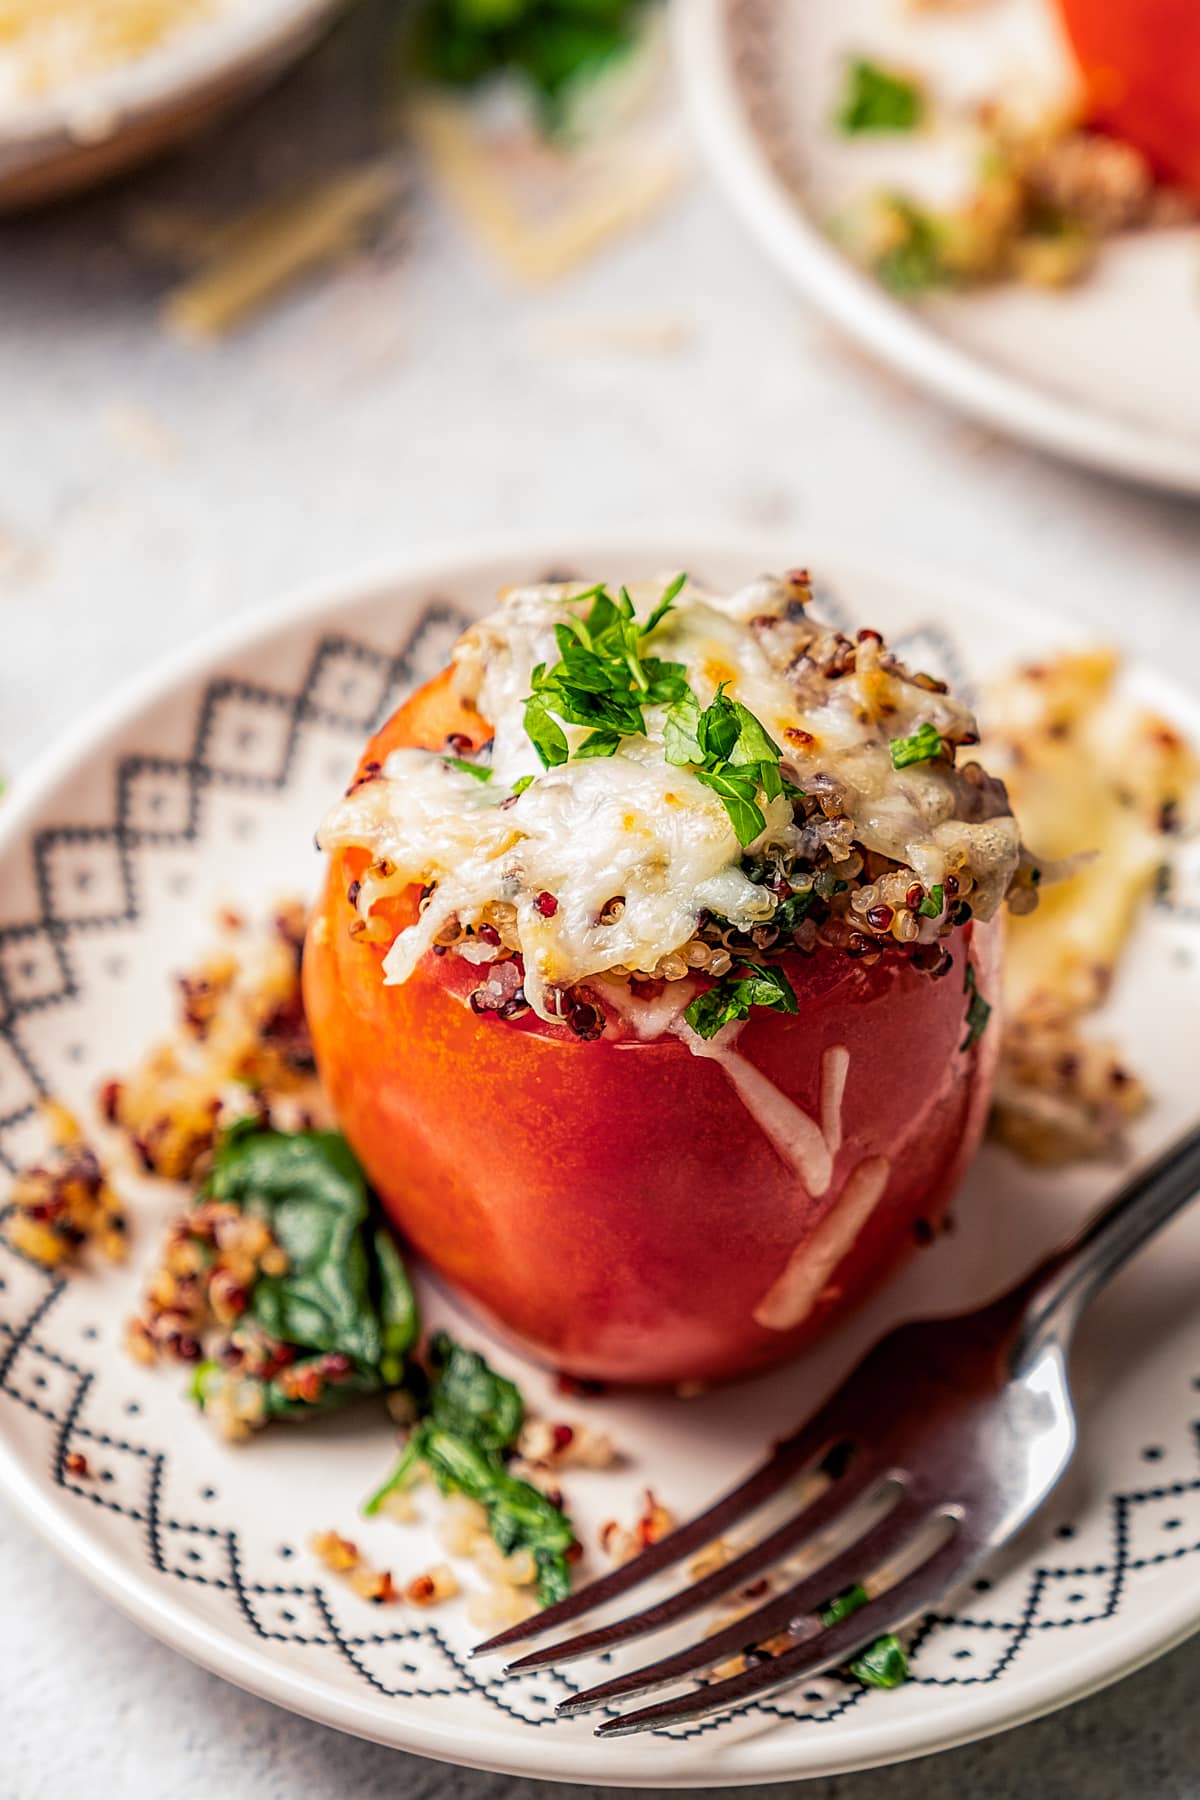 A quinoa stuffed tomato topped with melted cheese on a plate next to a fork, with more tomatoes served on plates in the background.